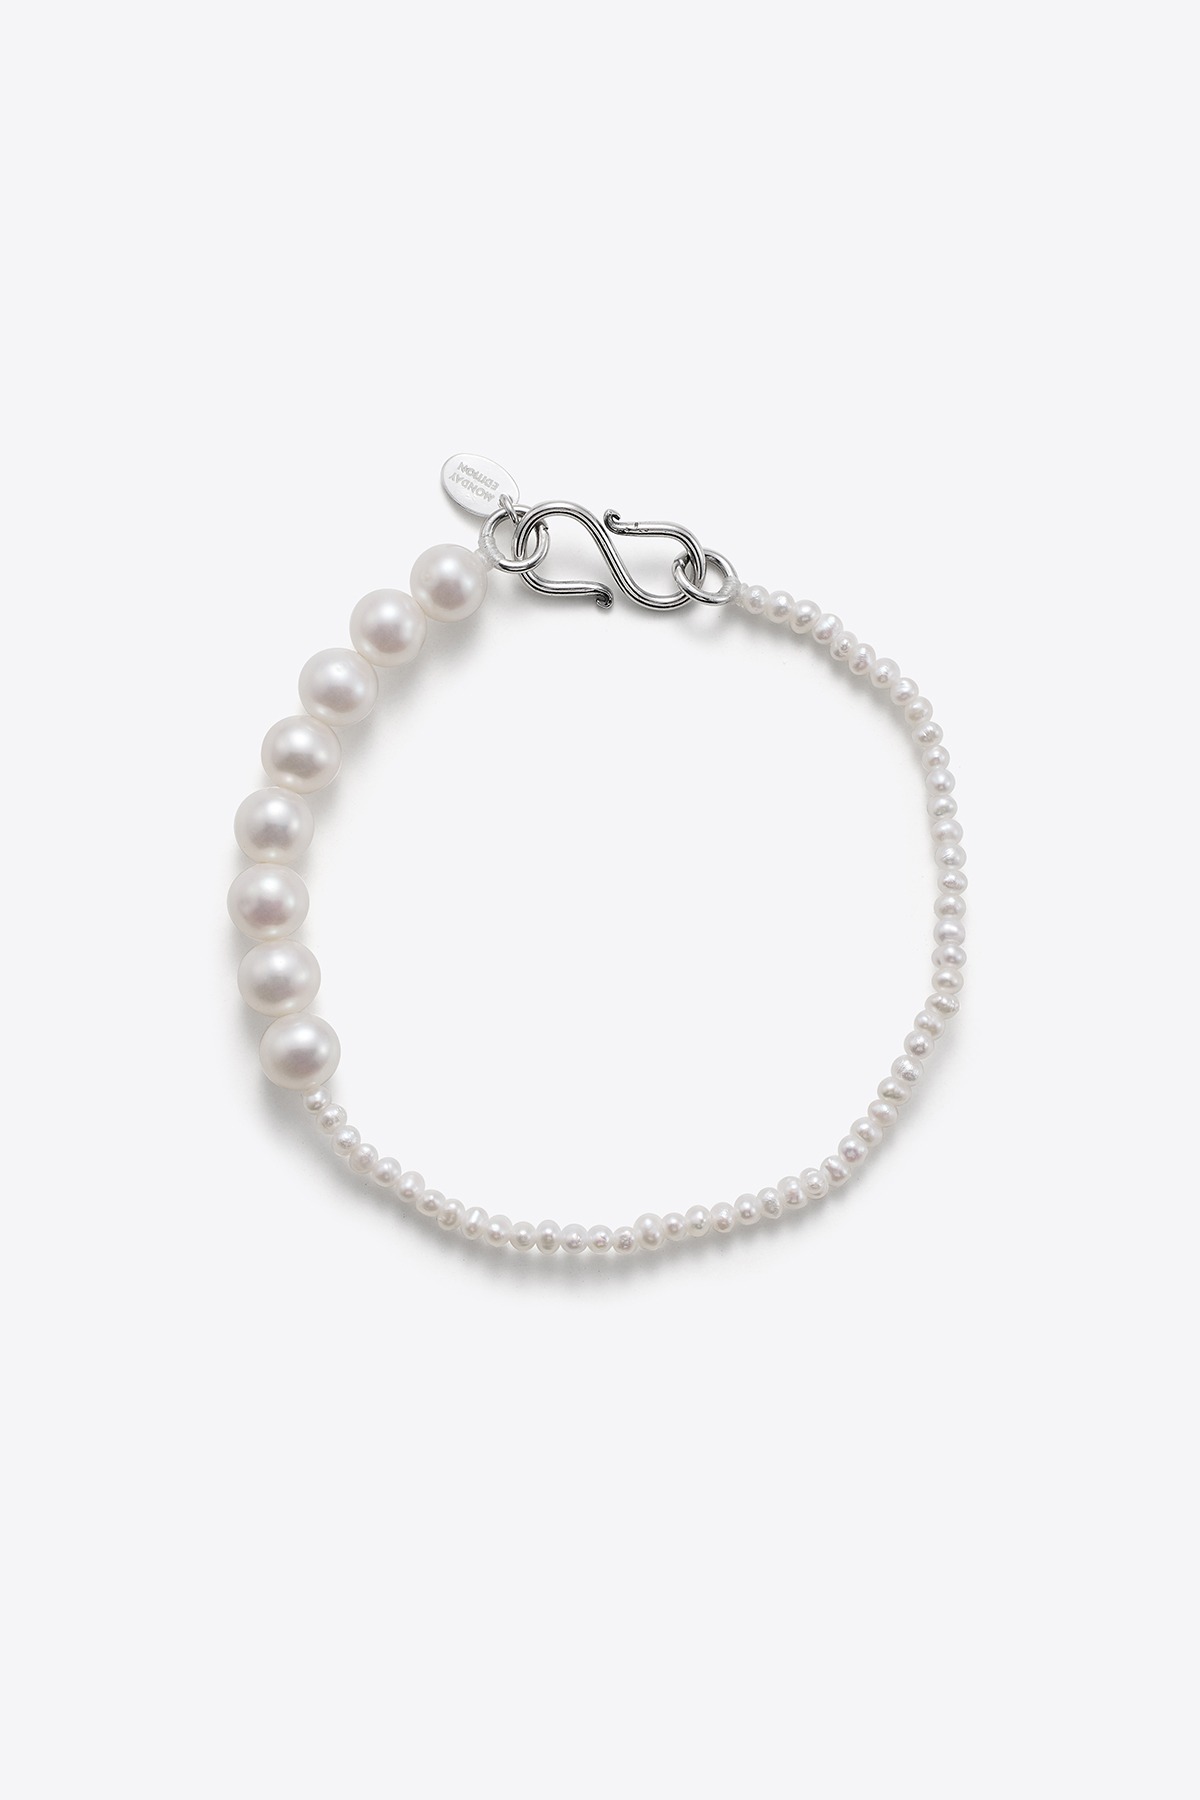 The mixed pearl bracelet